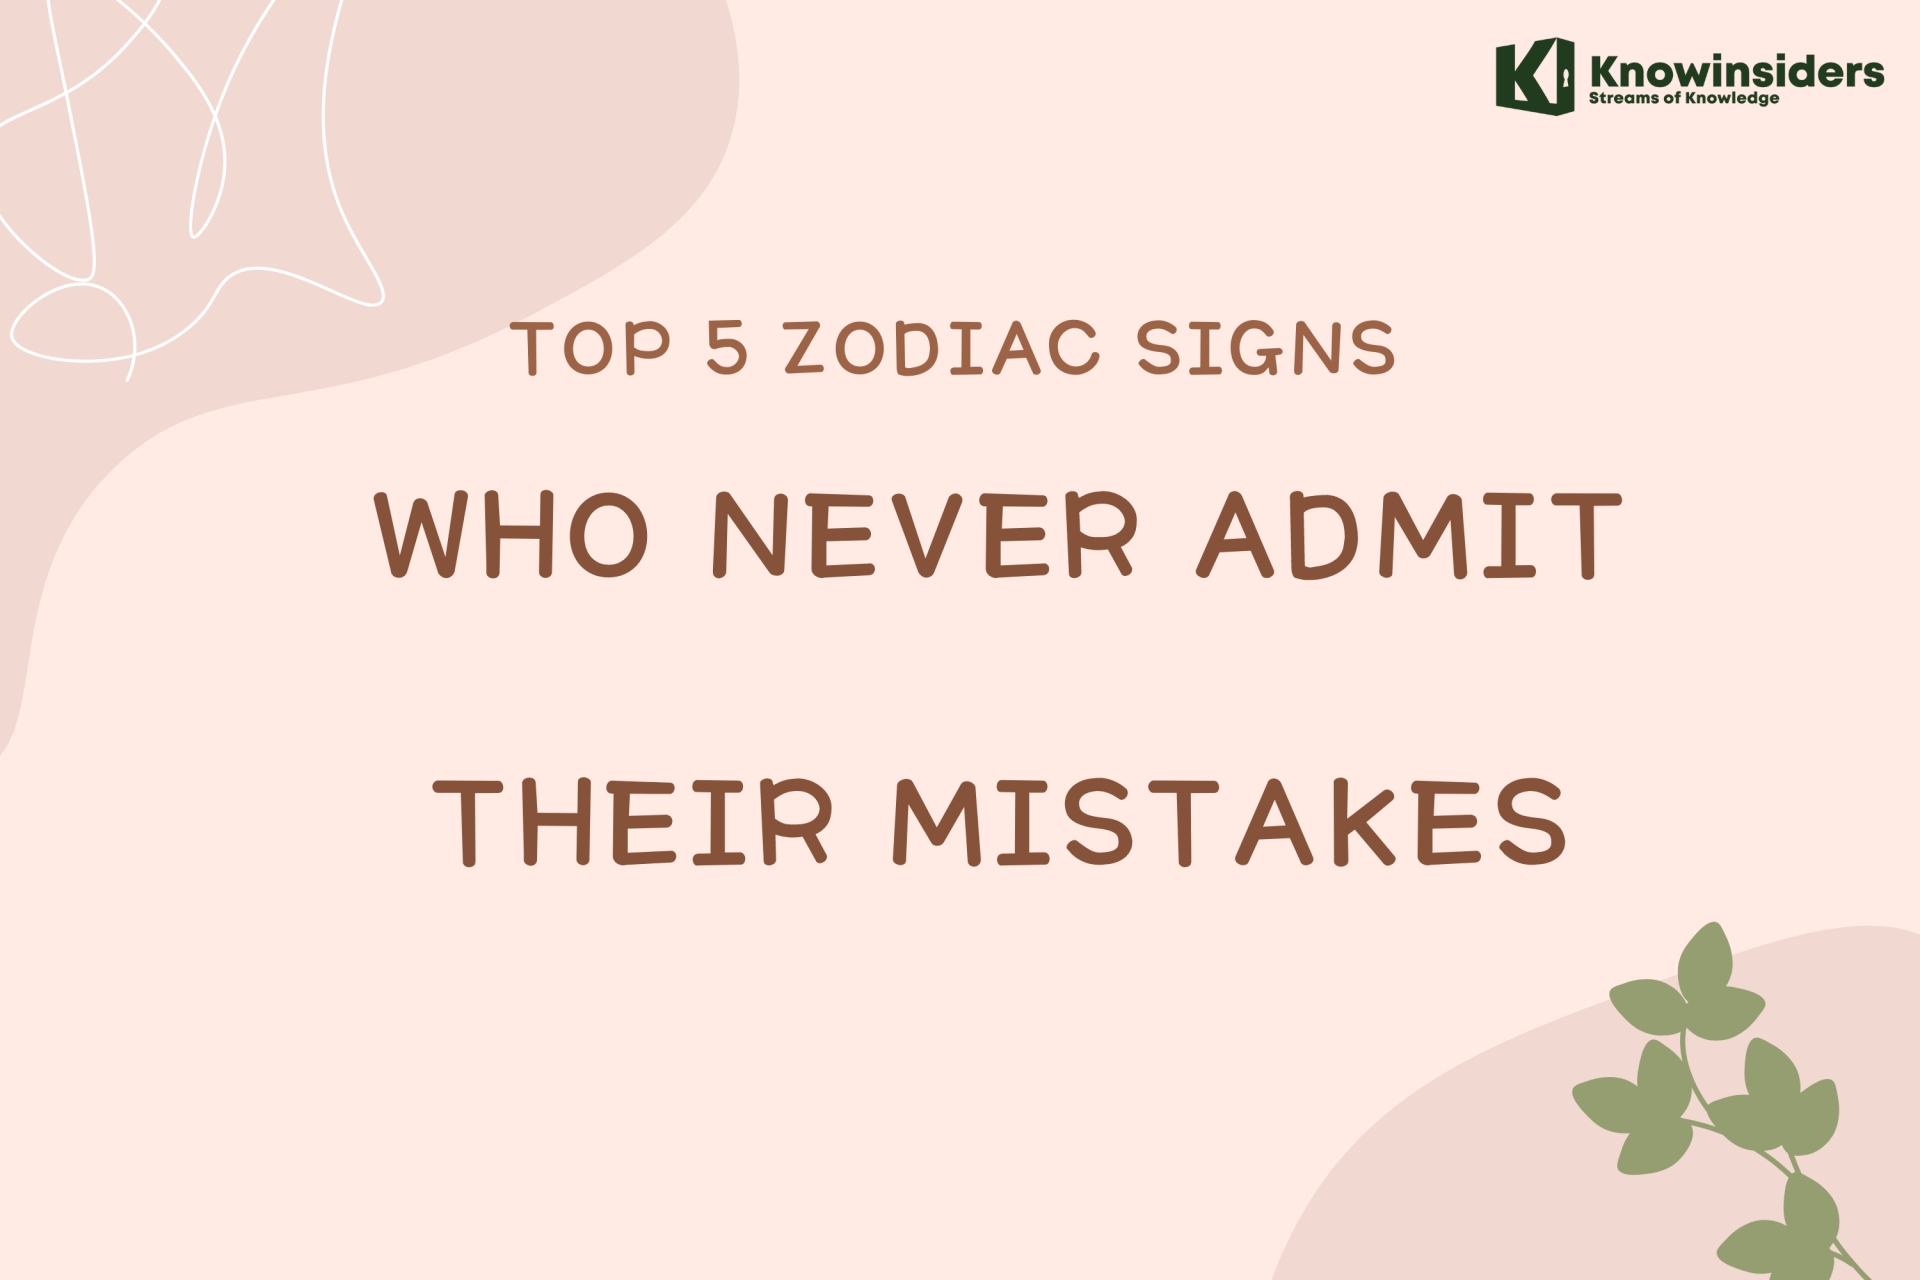 Top 5 Zodiac Signs Who Never Admit Their Mistakes